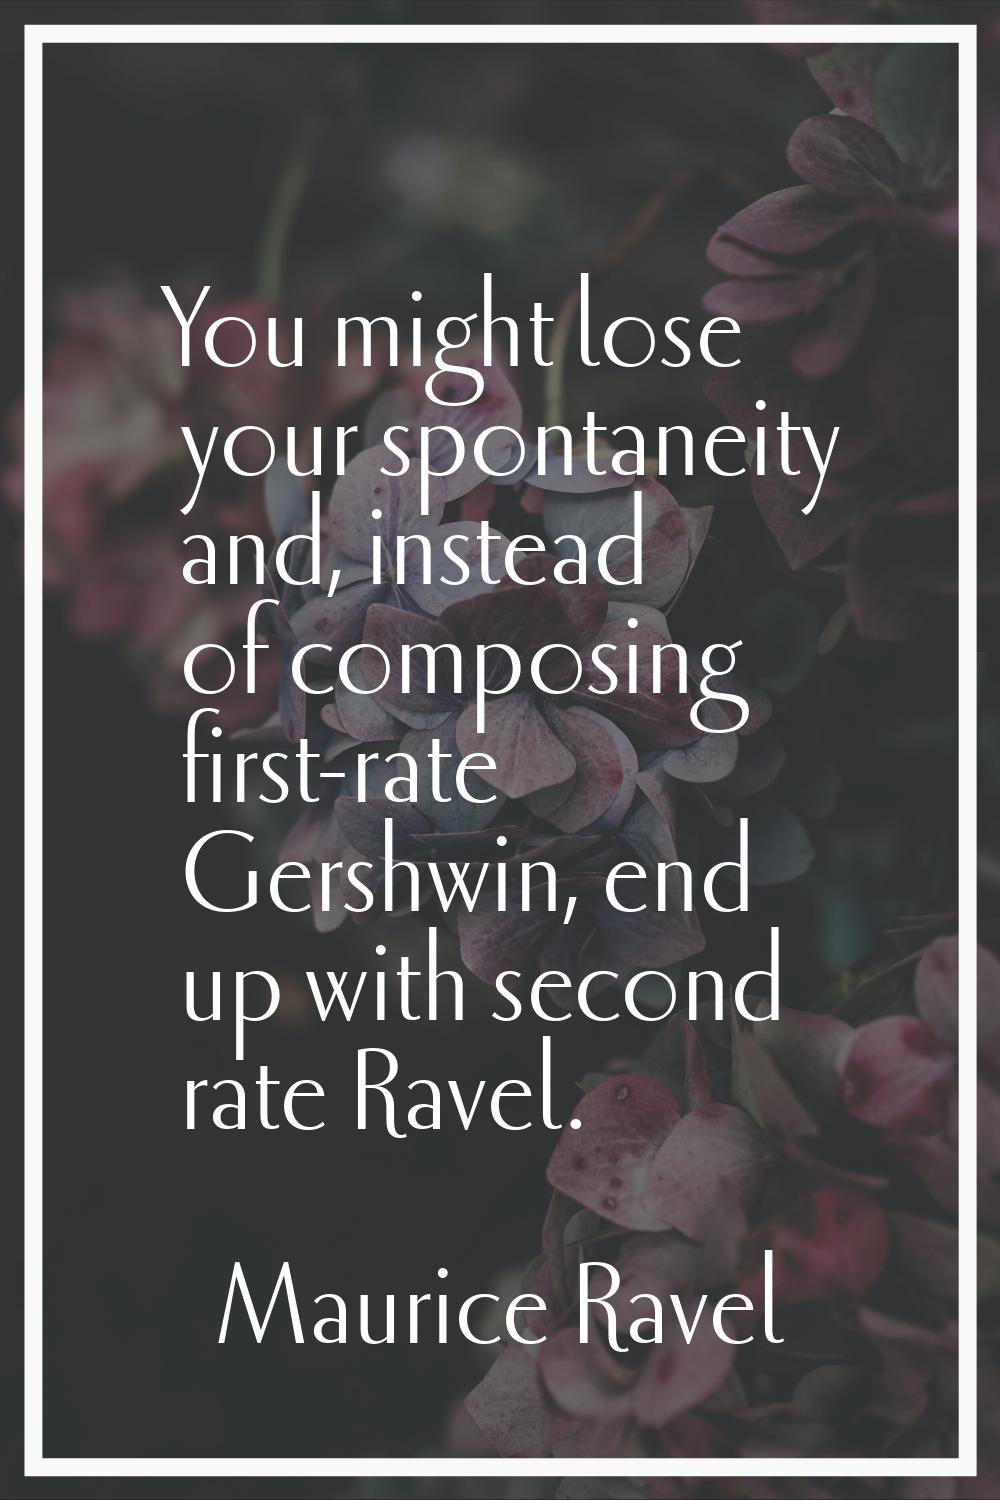 You might lose your spontaneity and, instead of composing first-rate Gershwin, end up with second r